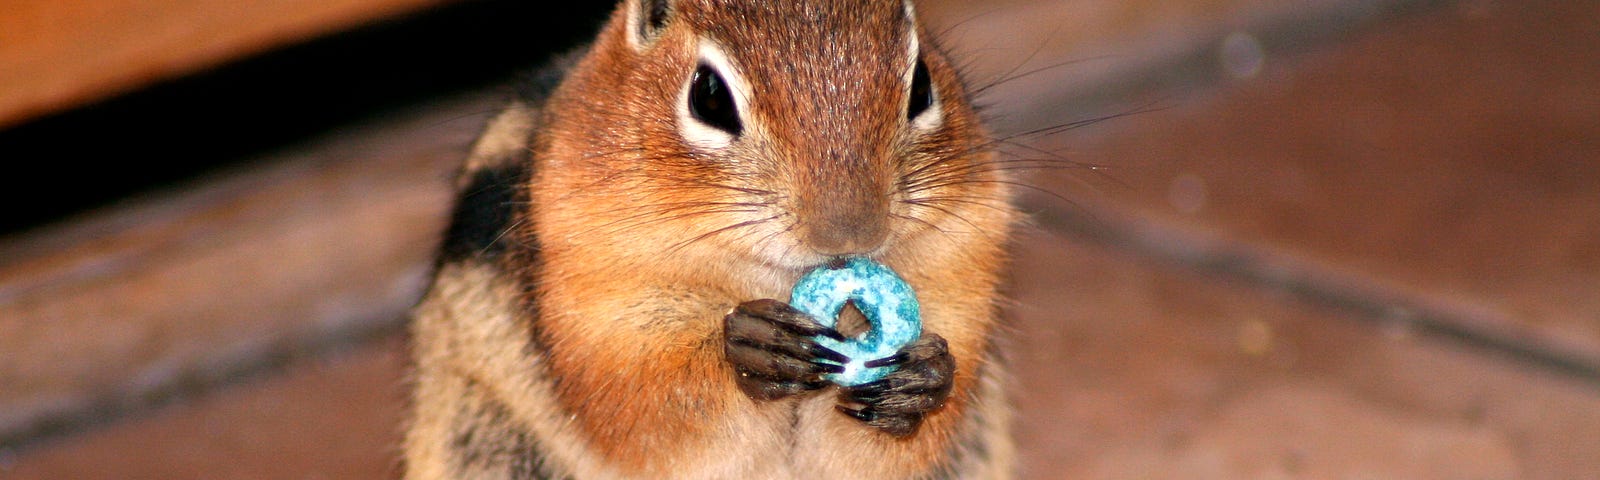 Weight loss. Squirrel eating a blue fruit loop.